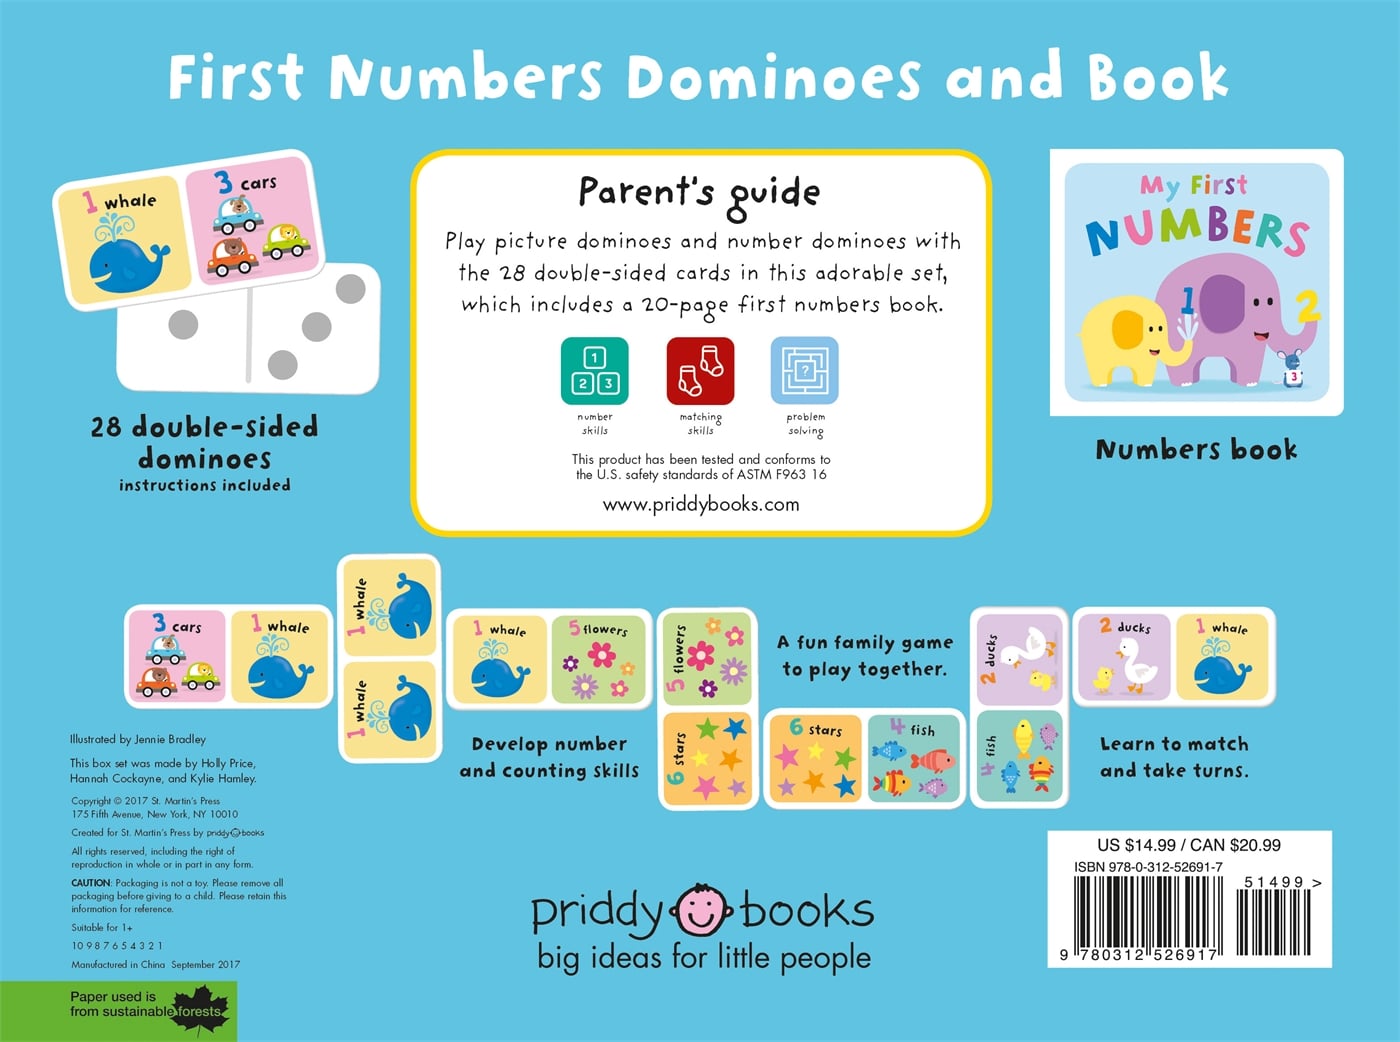 my-first-numbers-domino-and-book-set_1209891.jpg